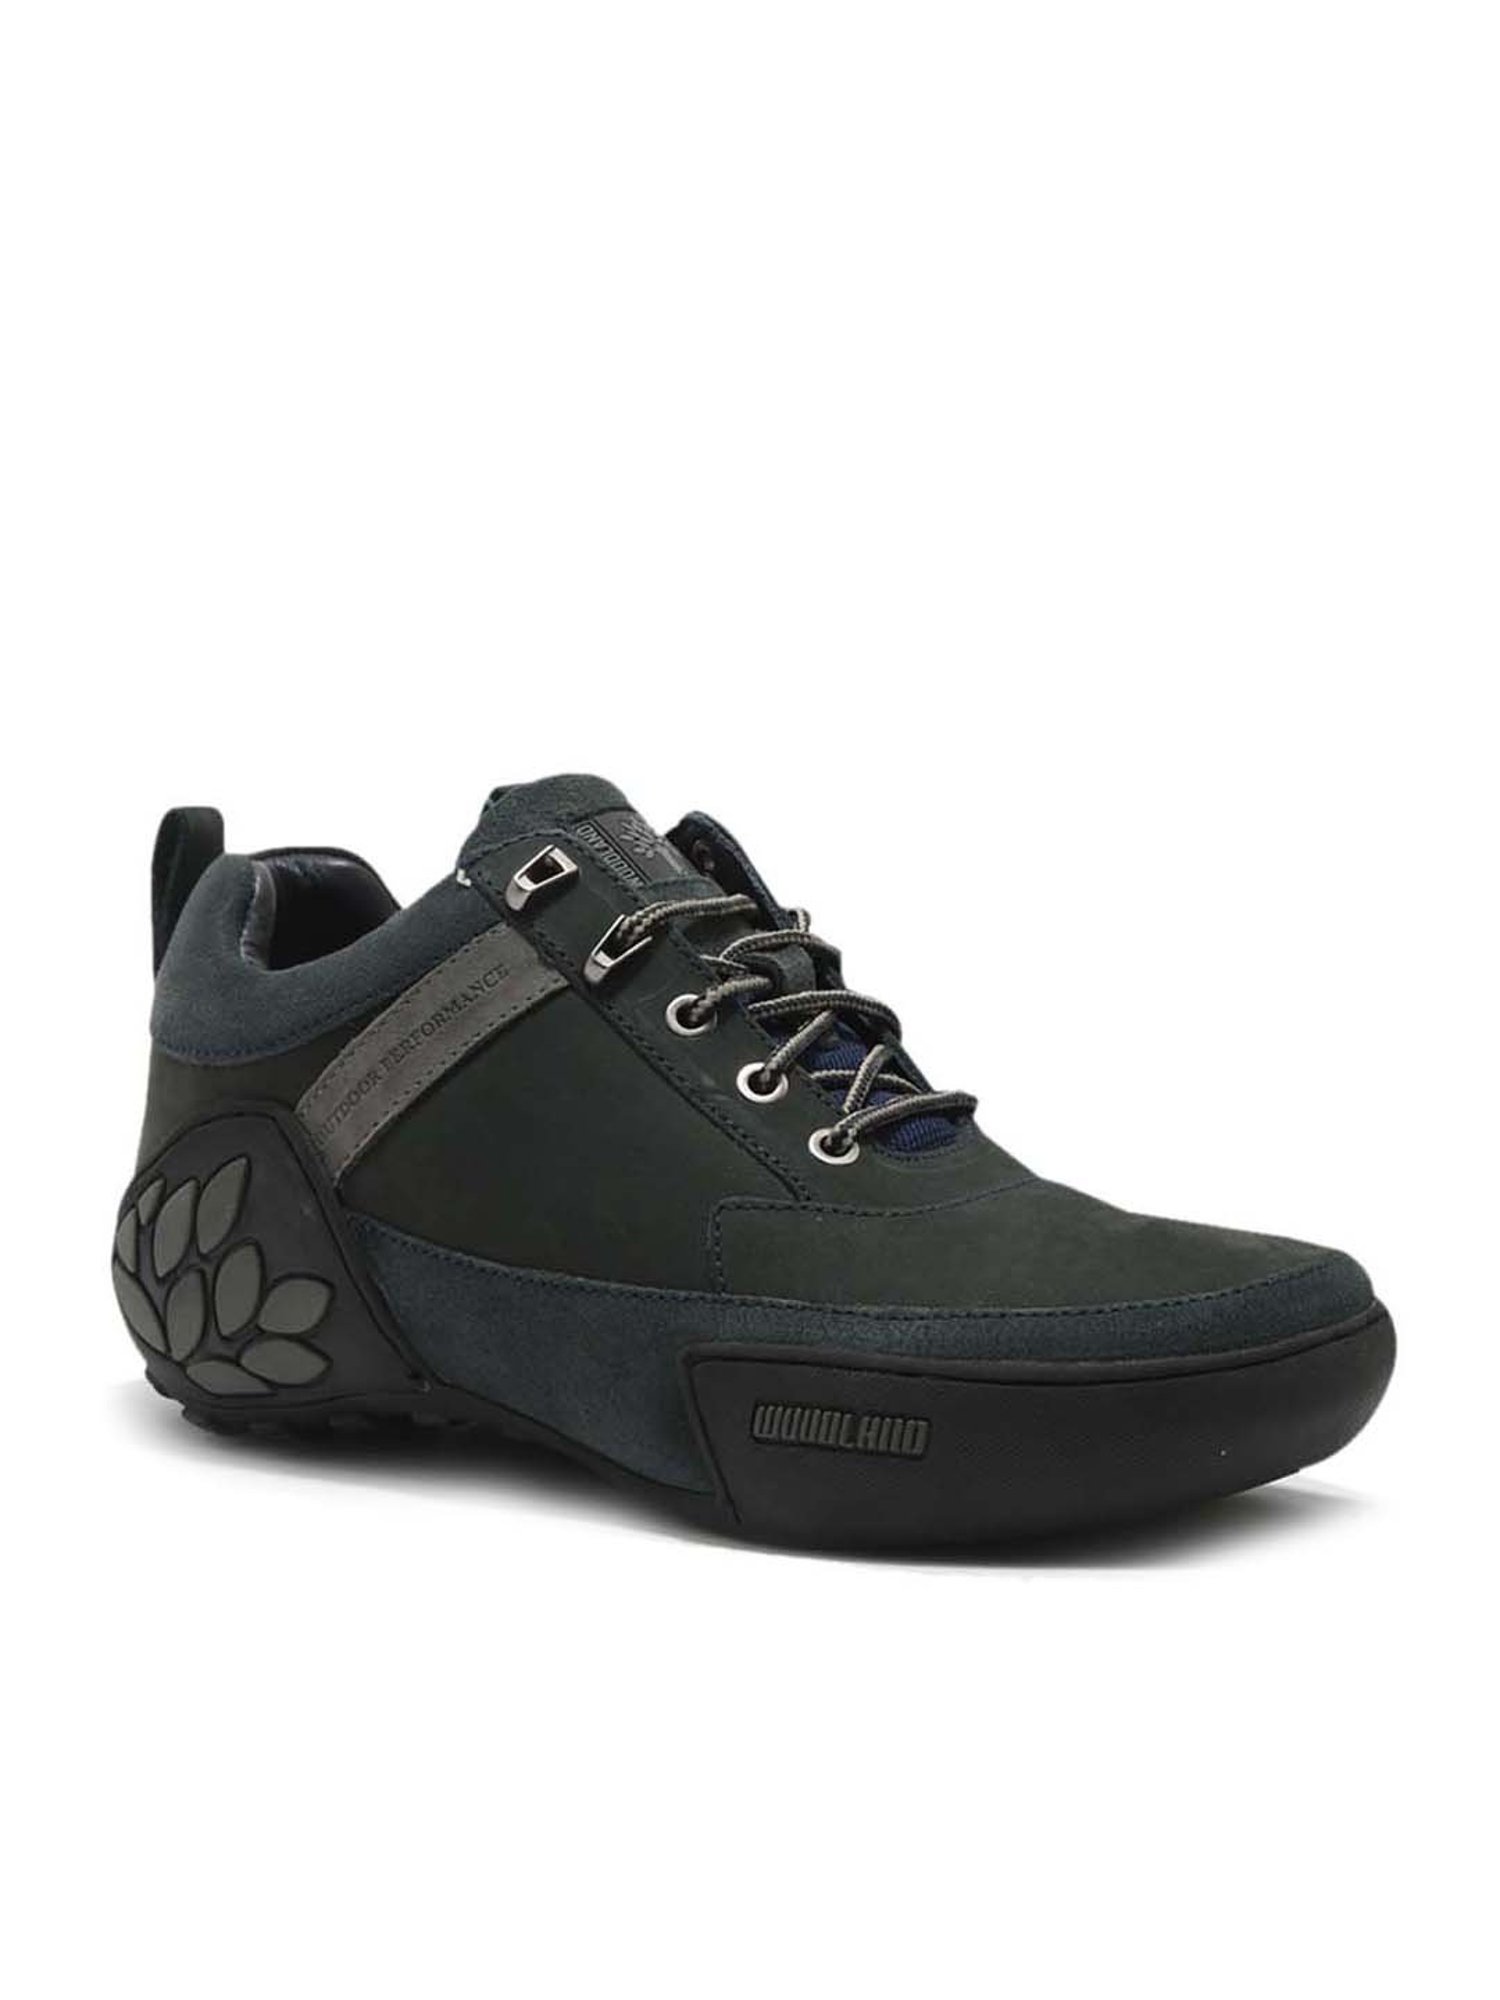 WOODLAND Casuals For Men (Black) - Price History